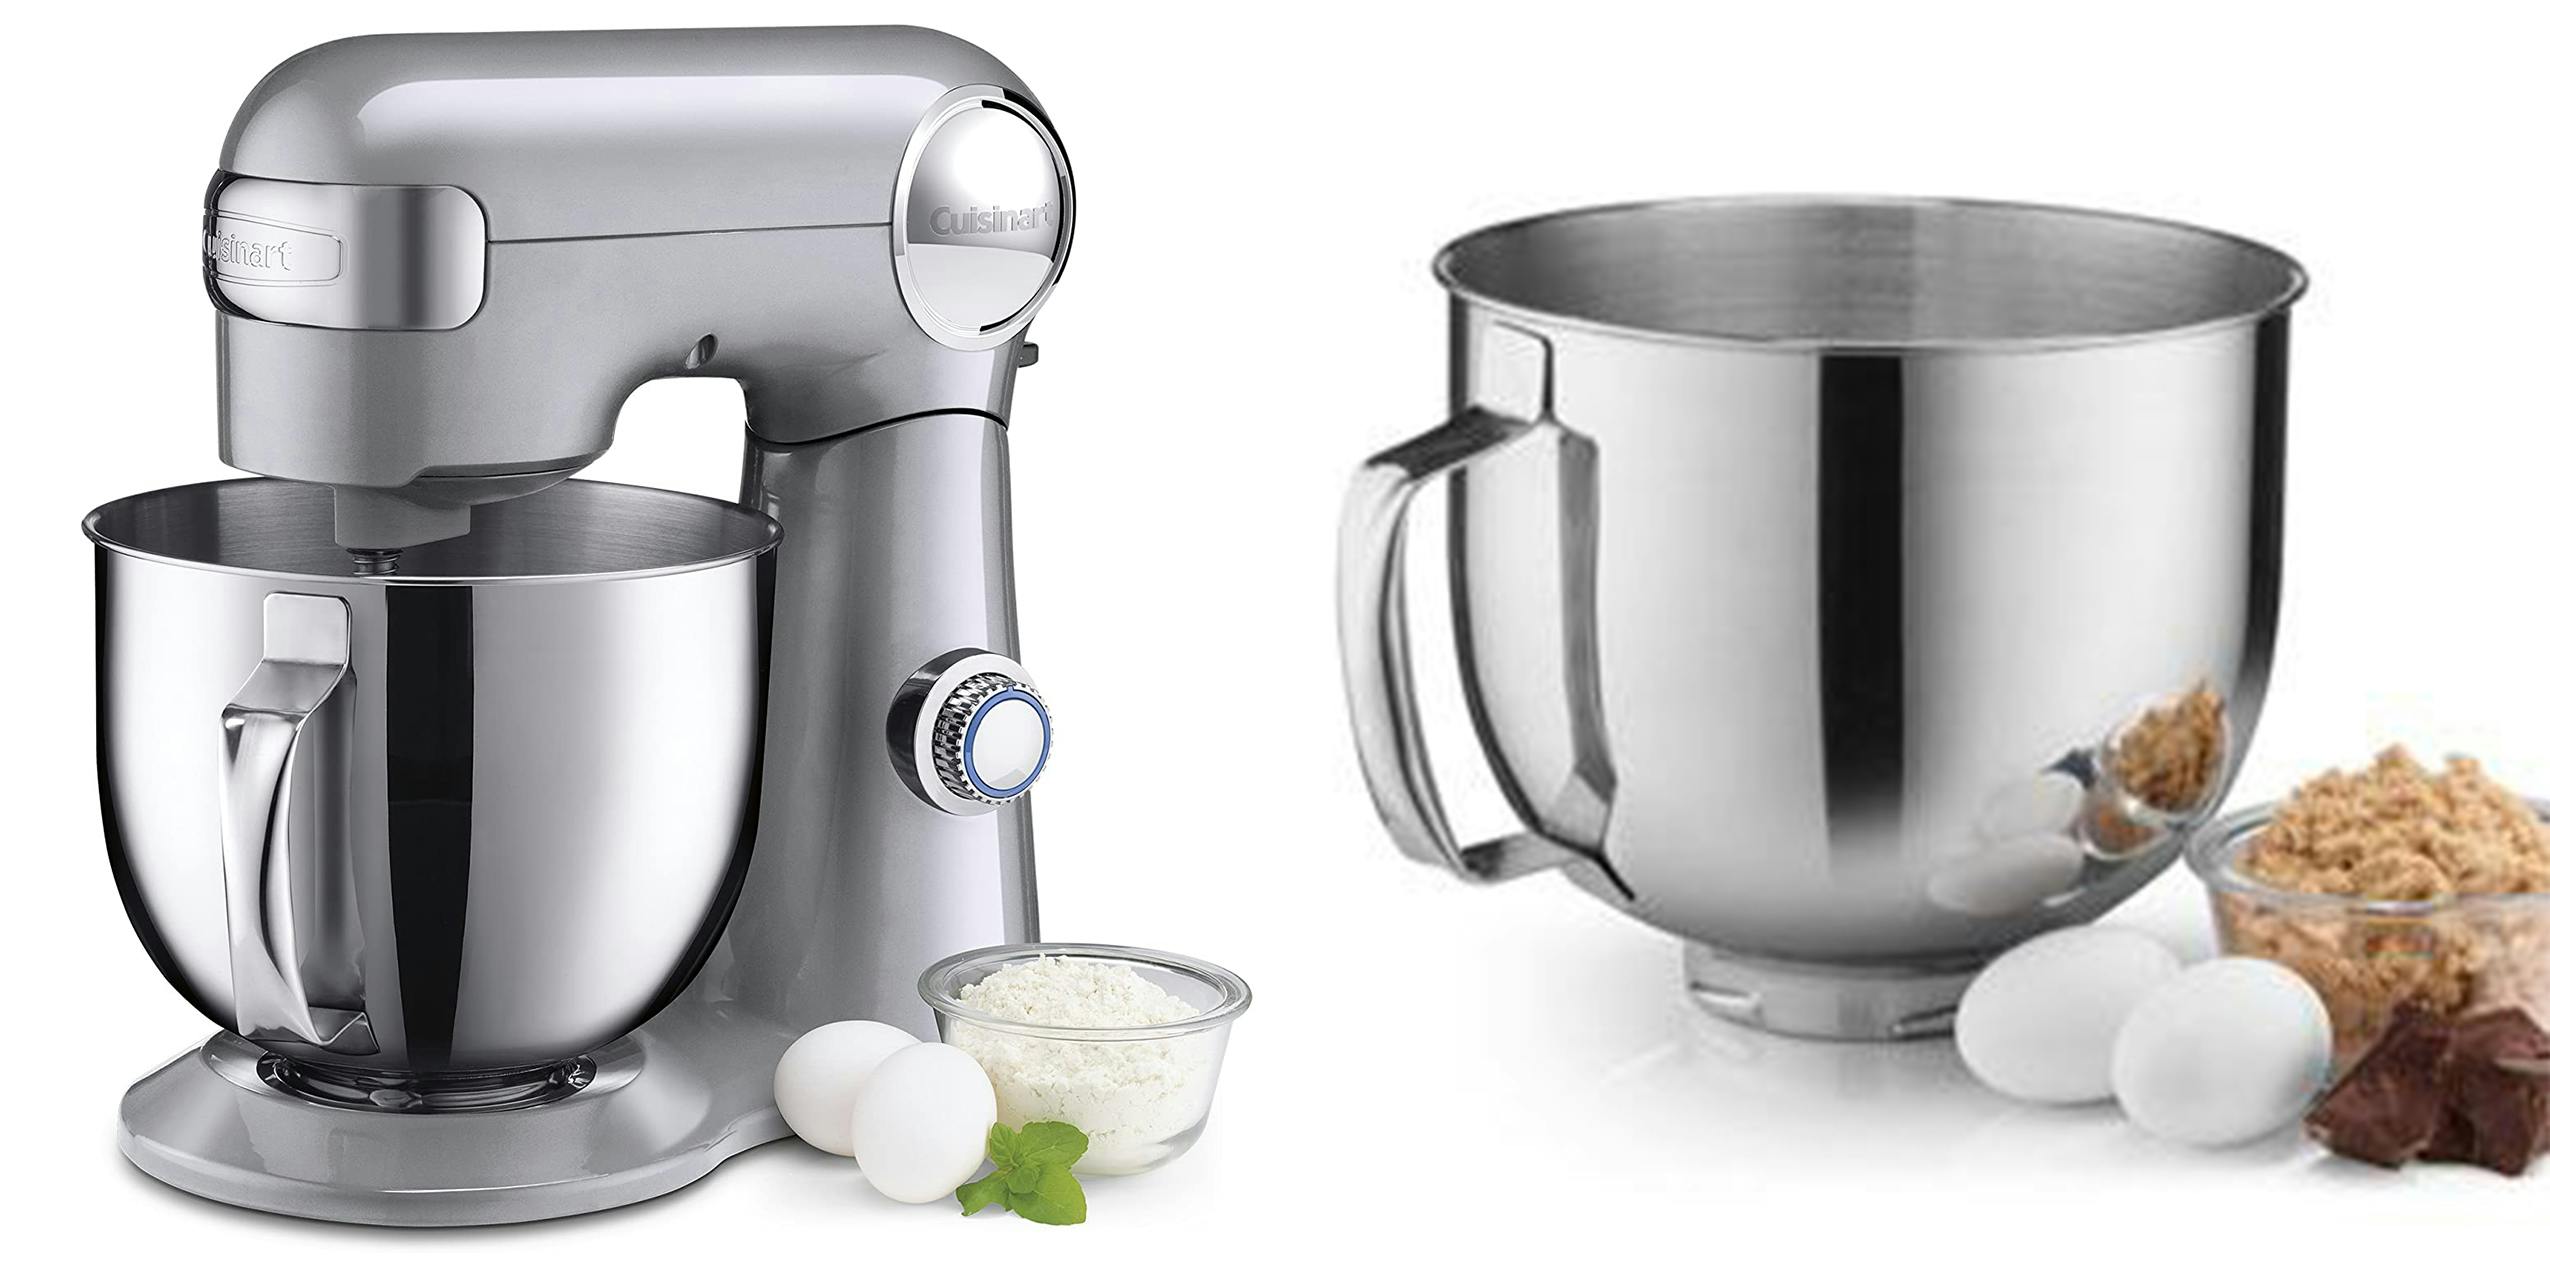 Cuisinart Stand Mixer lifestyle pictures.